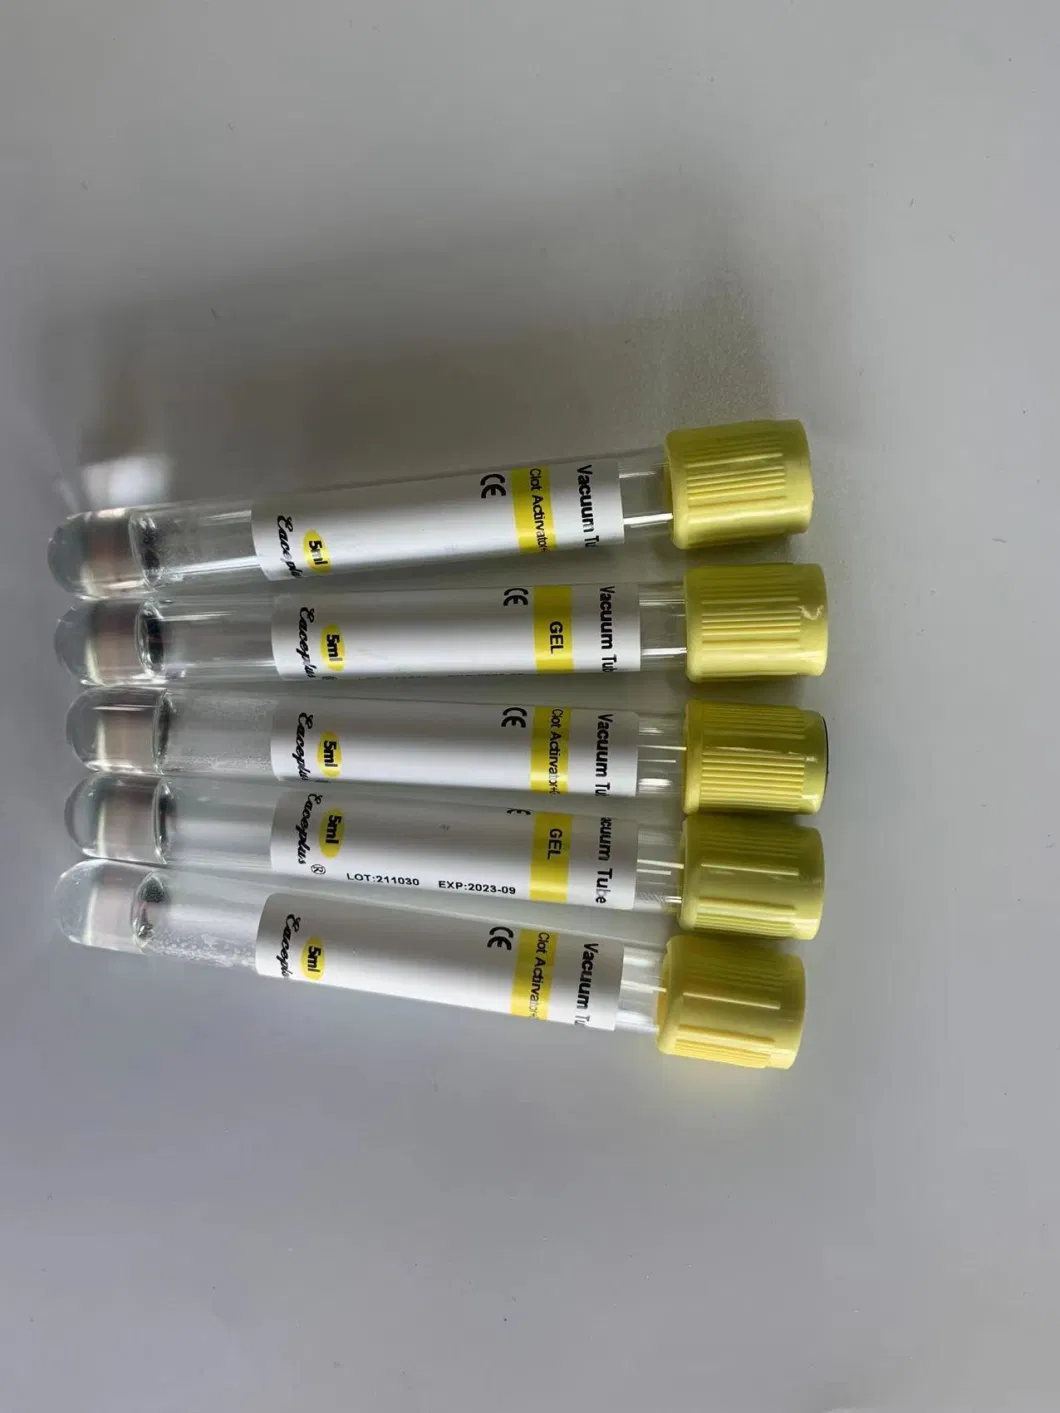 Siny Made in China Disposable Vacuum Blood Collection Tube with Gel